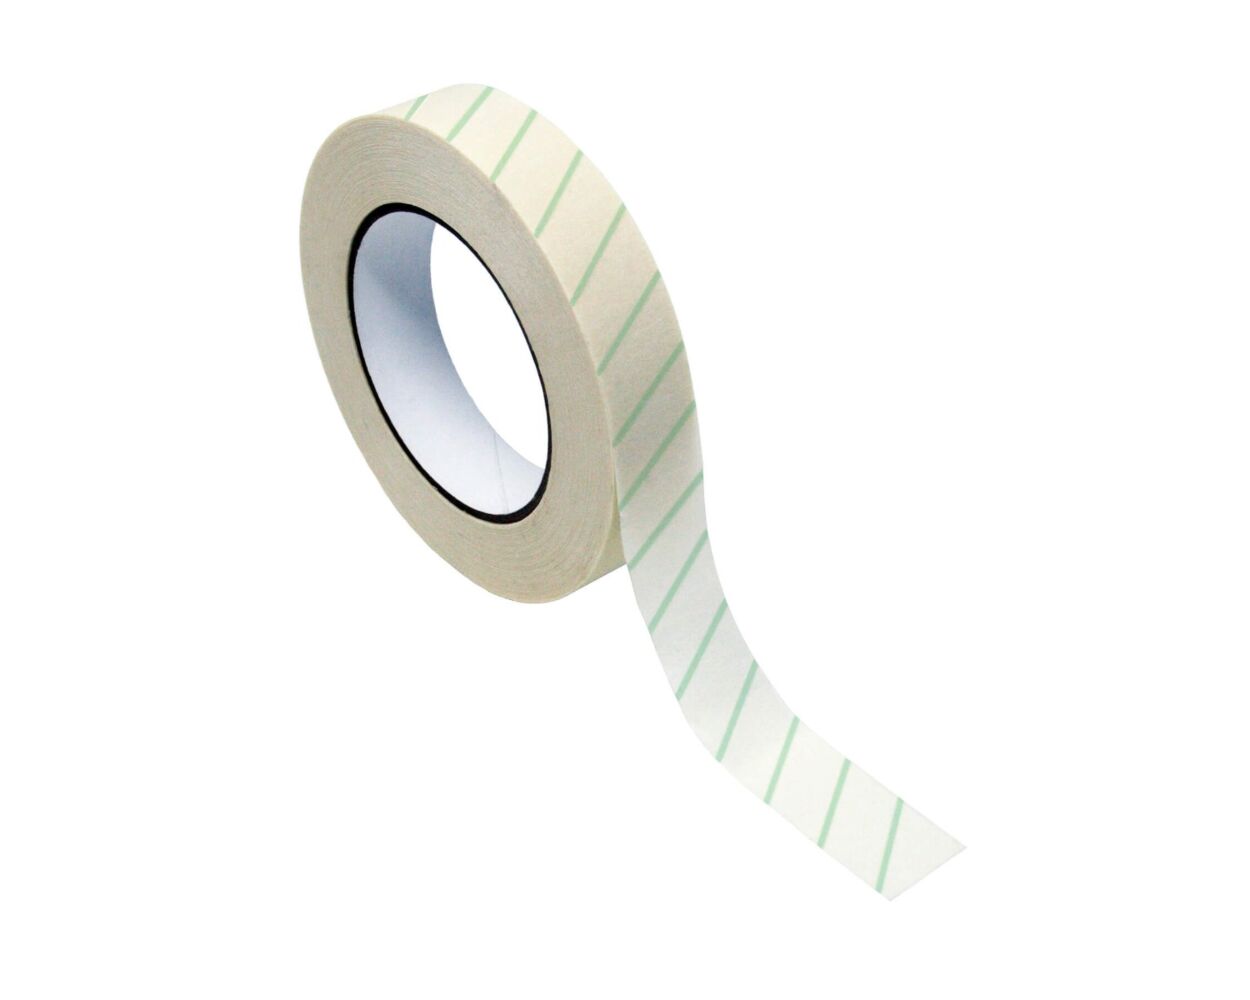 500 Shipping labels Sheets & 1 Roll of Tape, 1000 labels. (2) label & 2 Mil  tape